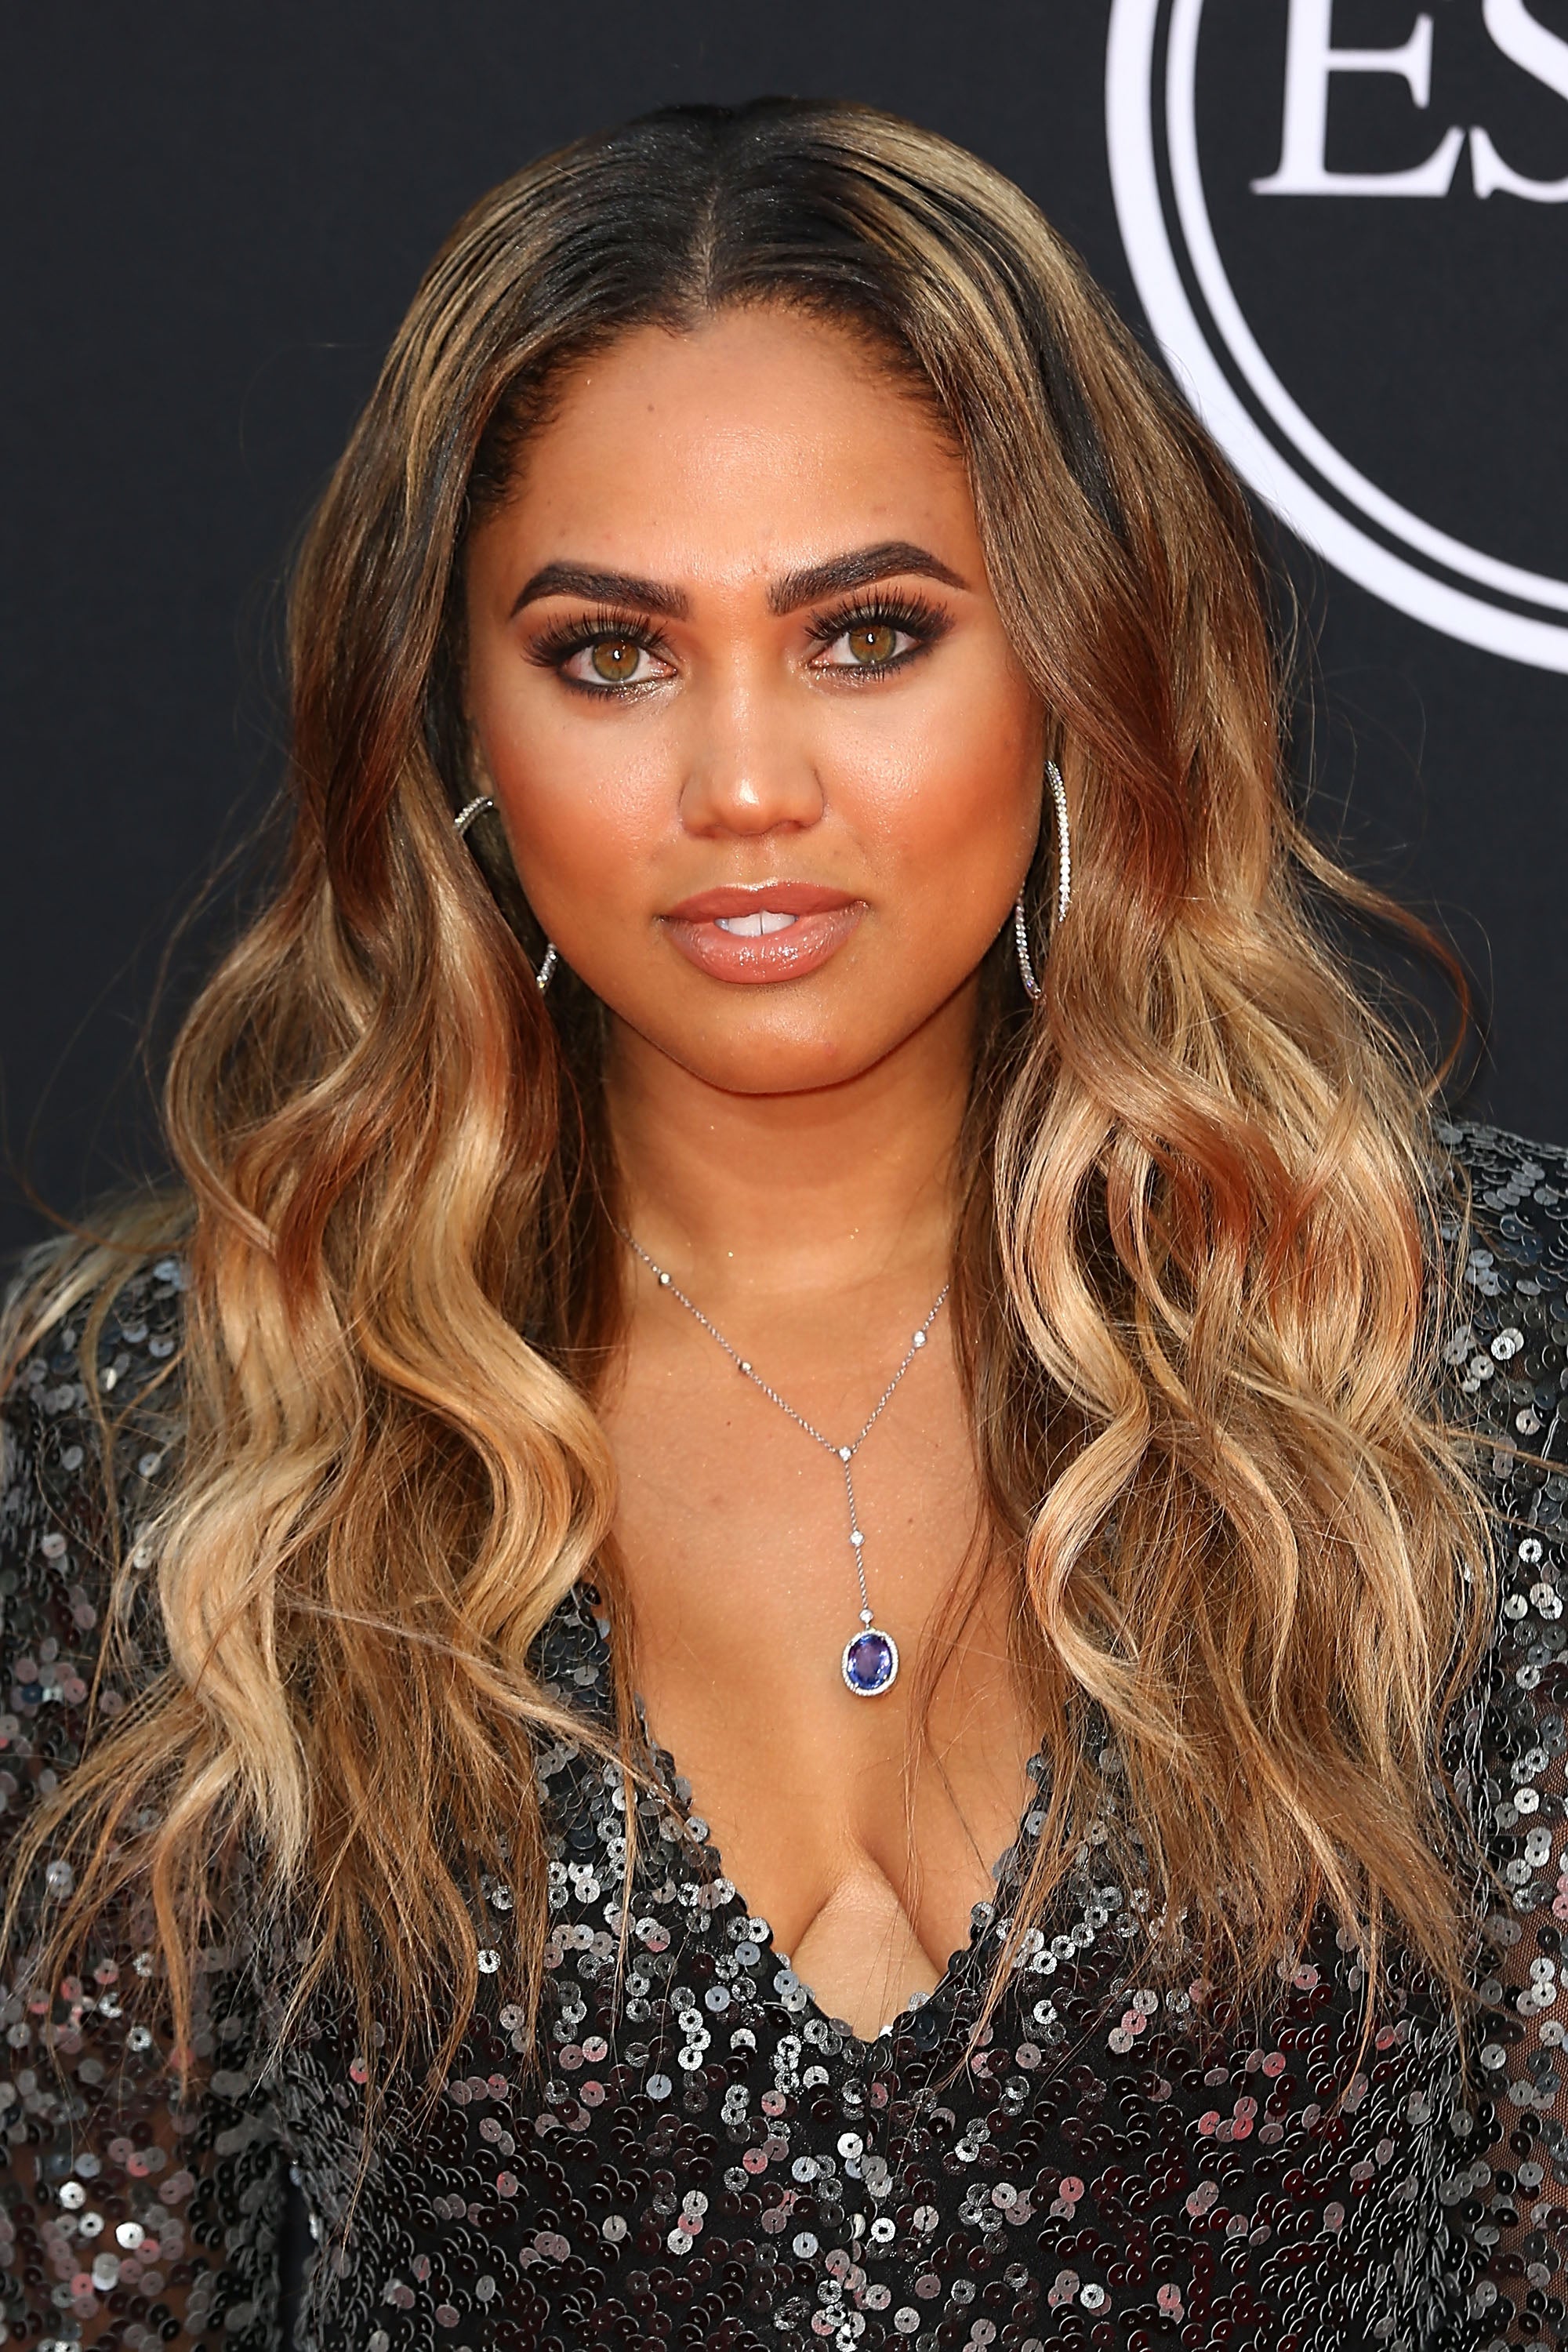 See How 17 Celebrities Rock Fall's Hottest Hair Color, Blonde
